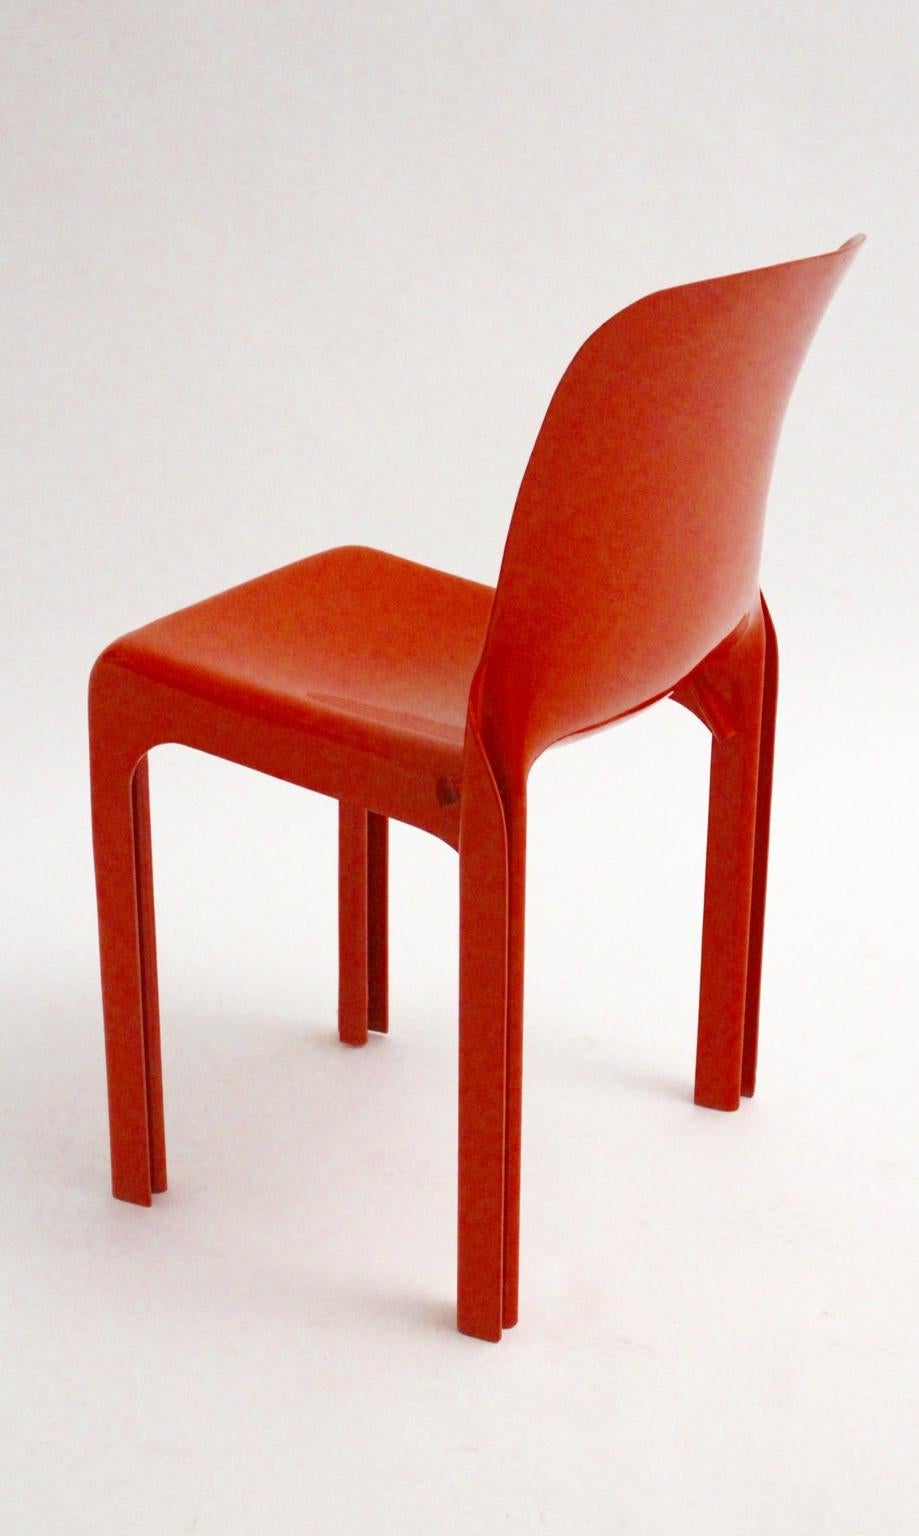 the red plastic chair